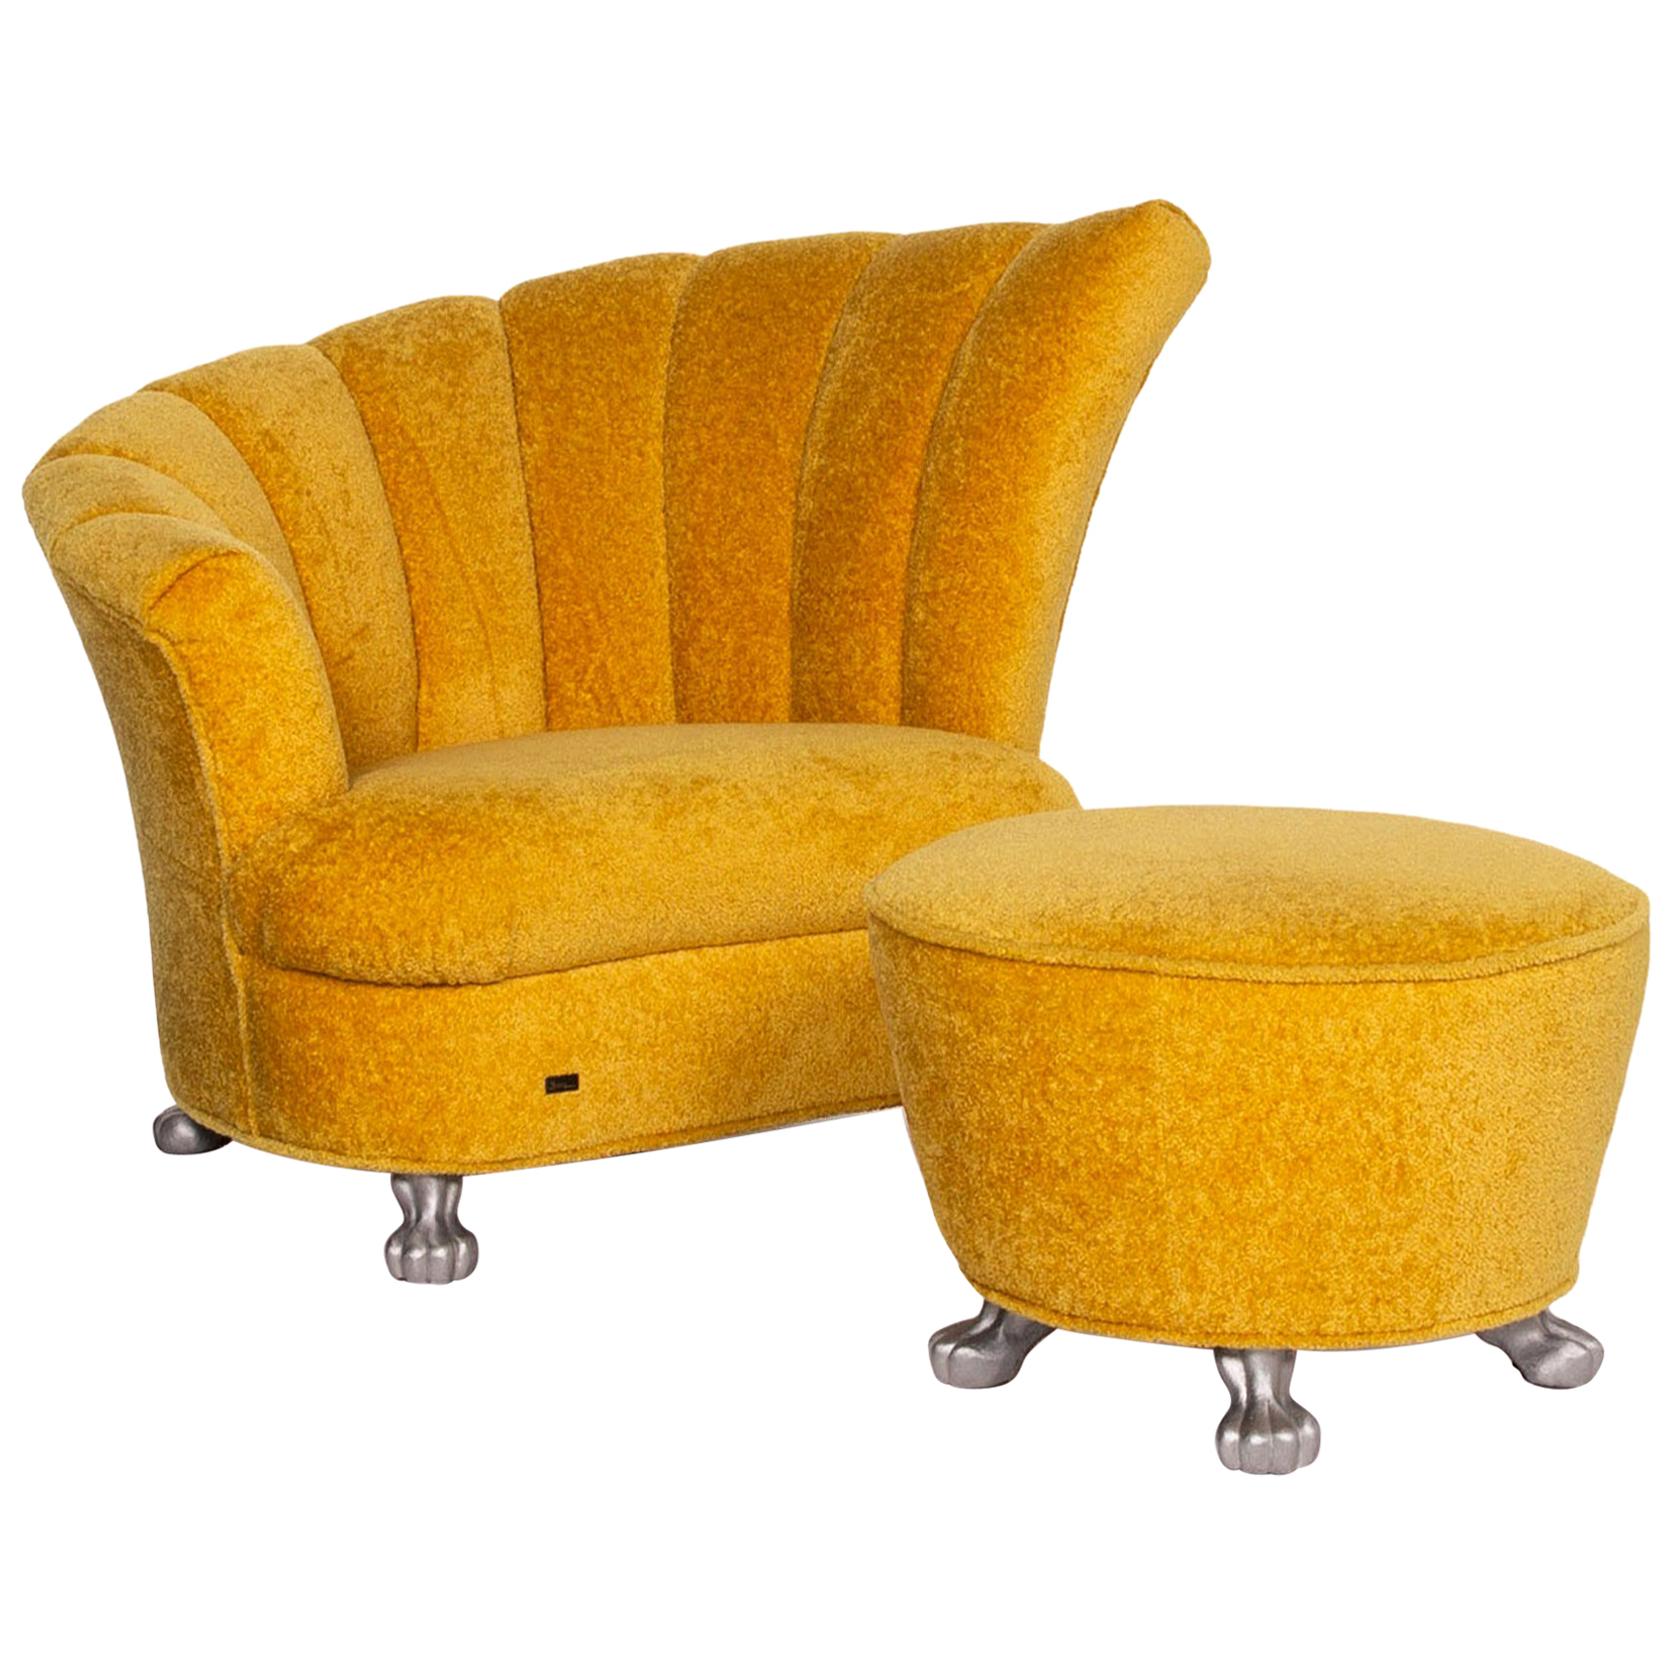 We Present to You a Bretz Fabric Armchair Set Yellow 1 Armchair 1 Stool